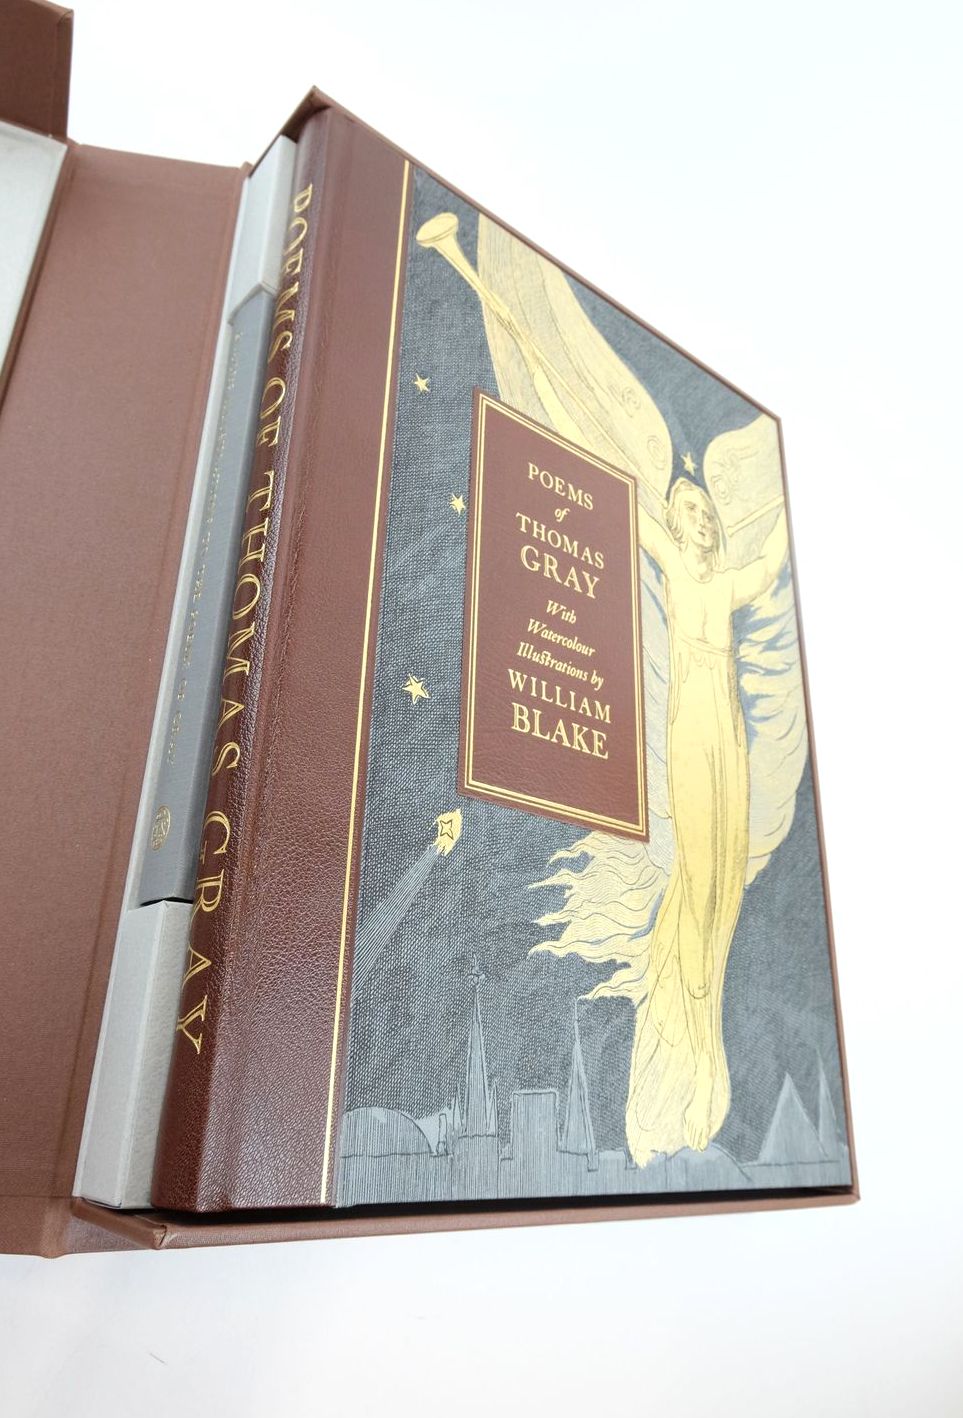 Photo of POEMS OF THOMAS GRAY written by Gray, Thomas Tayler, Irene illustrated by Blake, William published by Folio Society (STOCK CODE: 1821644)  for sale by Stella & Rose's Books